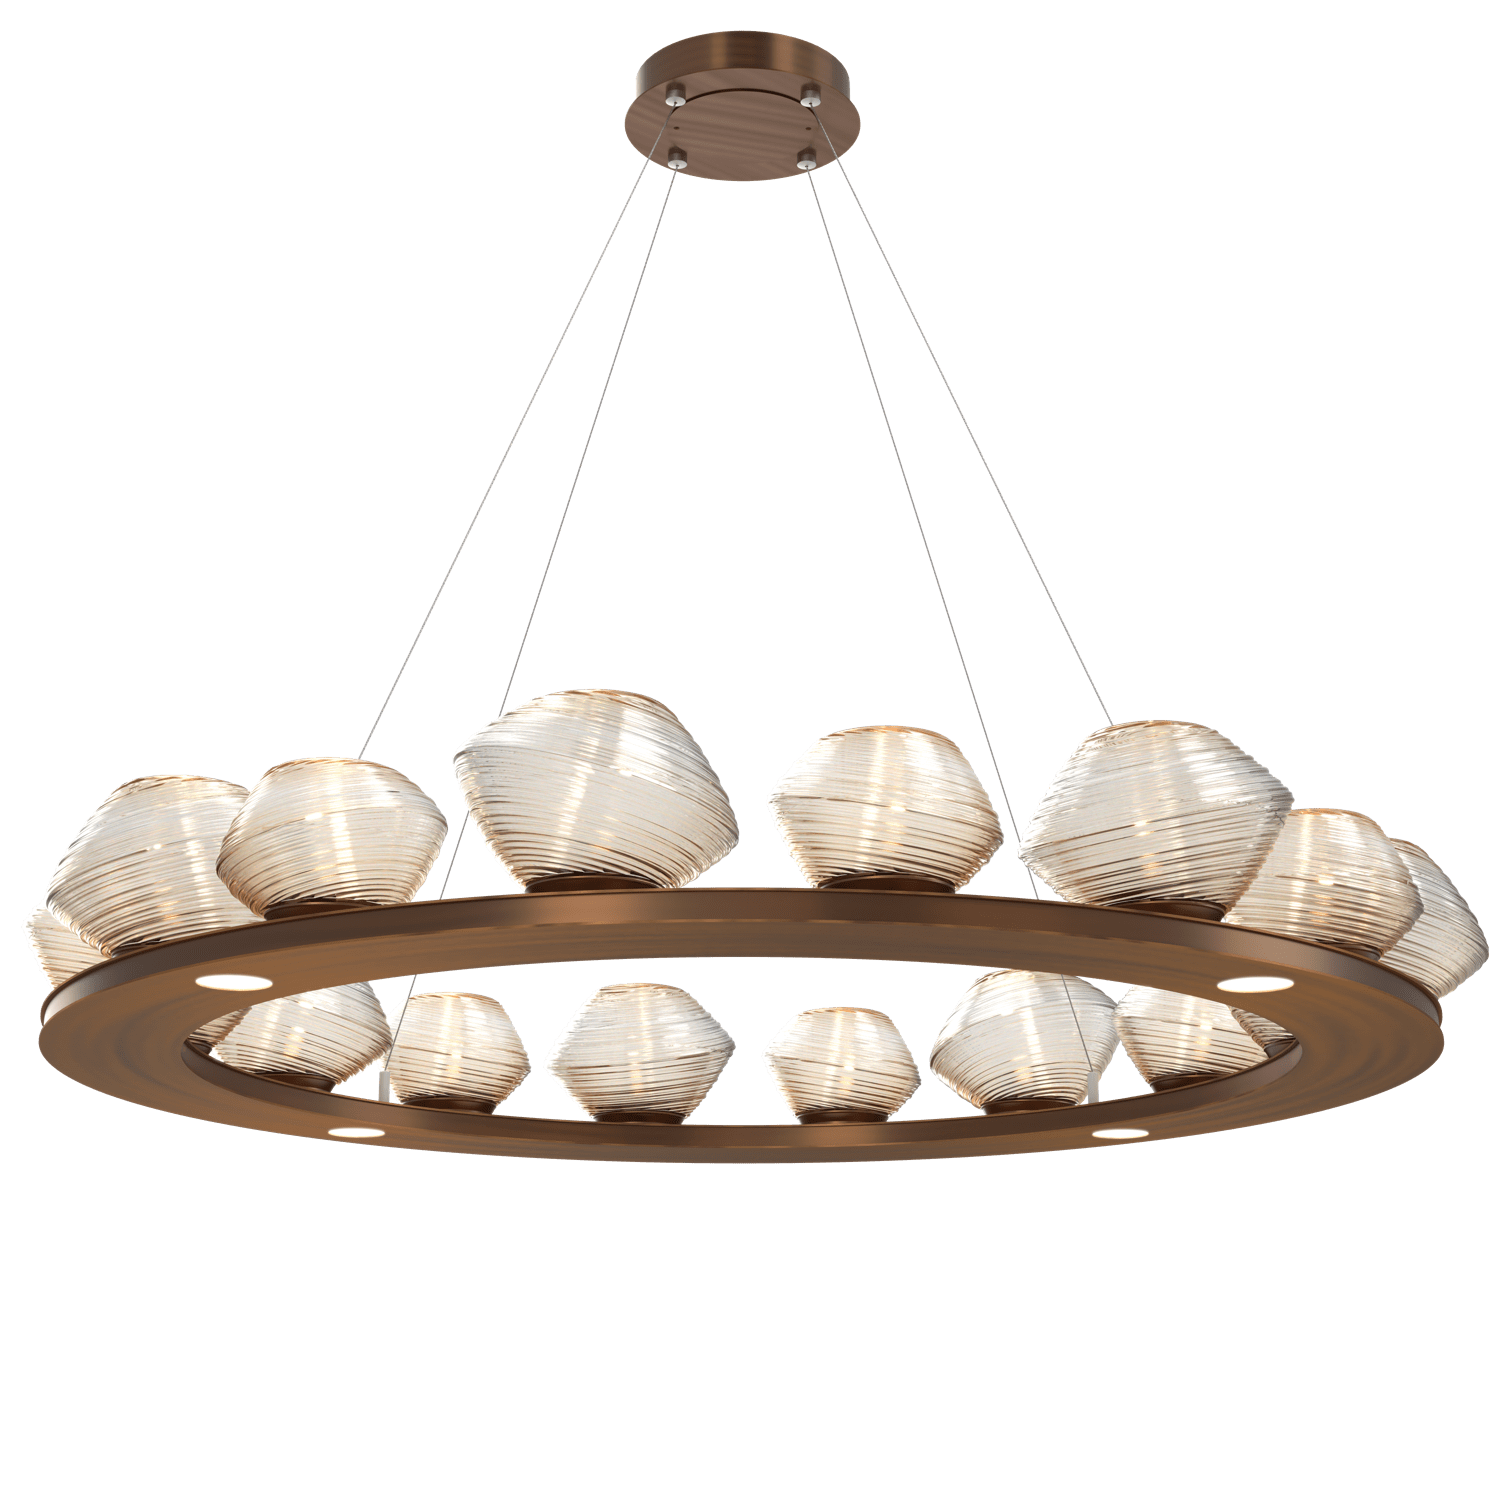 CHB0089-0D-RB-A-Hammerton-Studio-Mesa-48-inch-ring-chandelier-with-oil-rubbed-bronze-finish-and-amber-blown-glass-shades-and-LED-lamping